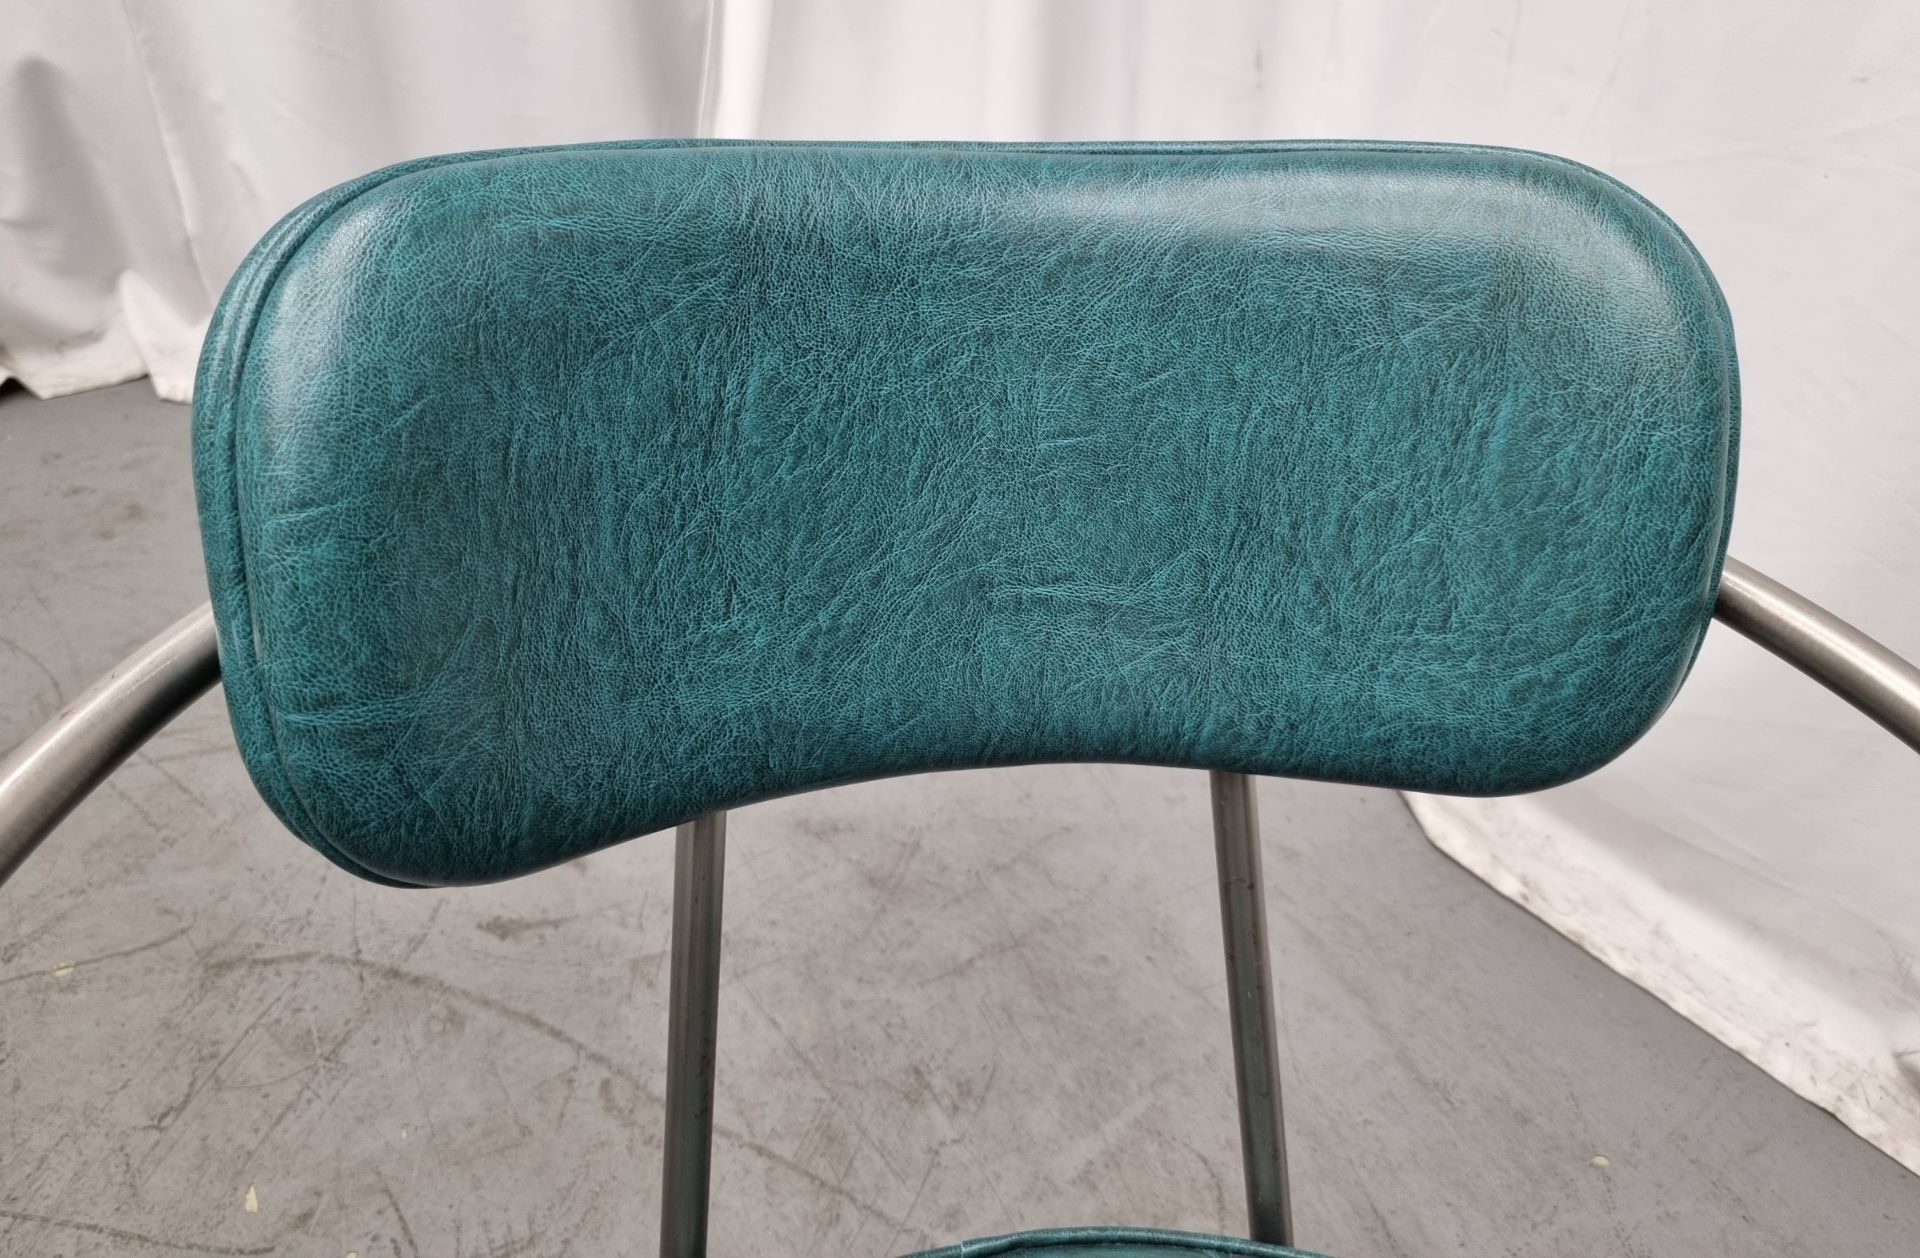 4x Industrial green leather restaurant chairs - L 550 x W 600 x H 80cm - Image 6 of 11